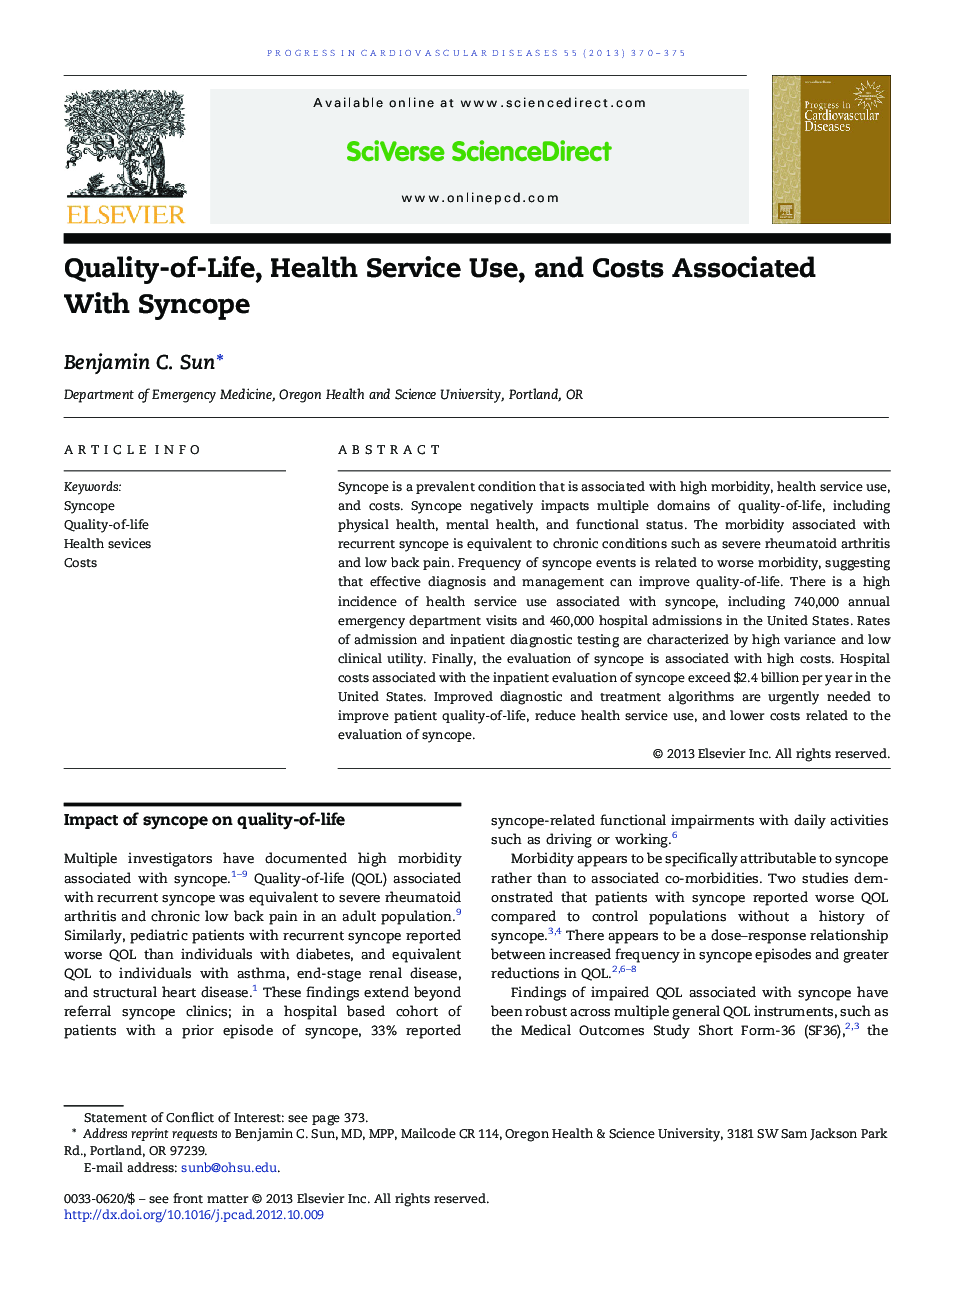 Quality-of-Life, Health Service Use, and Costs Associated With Syncope 